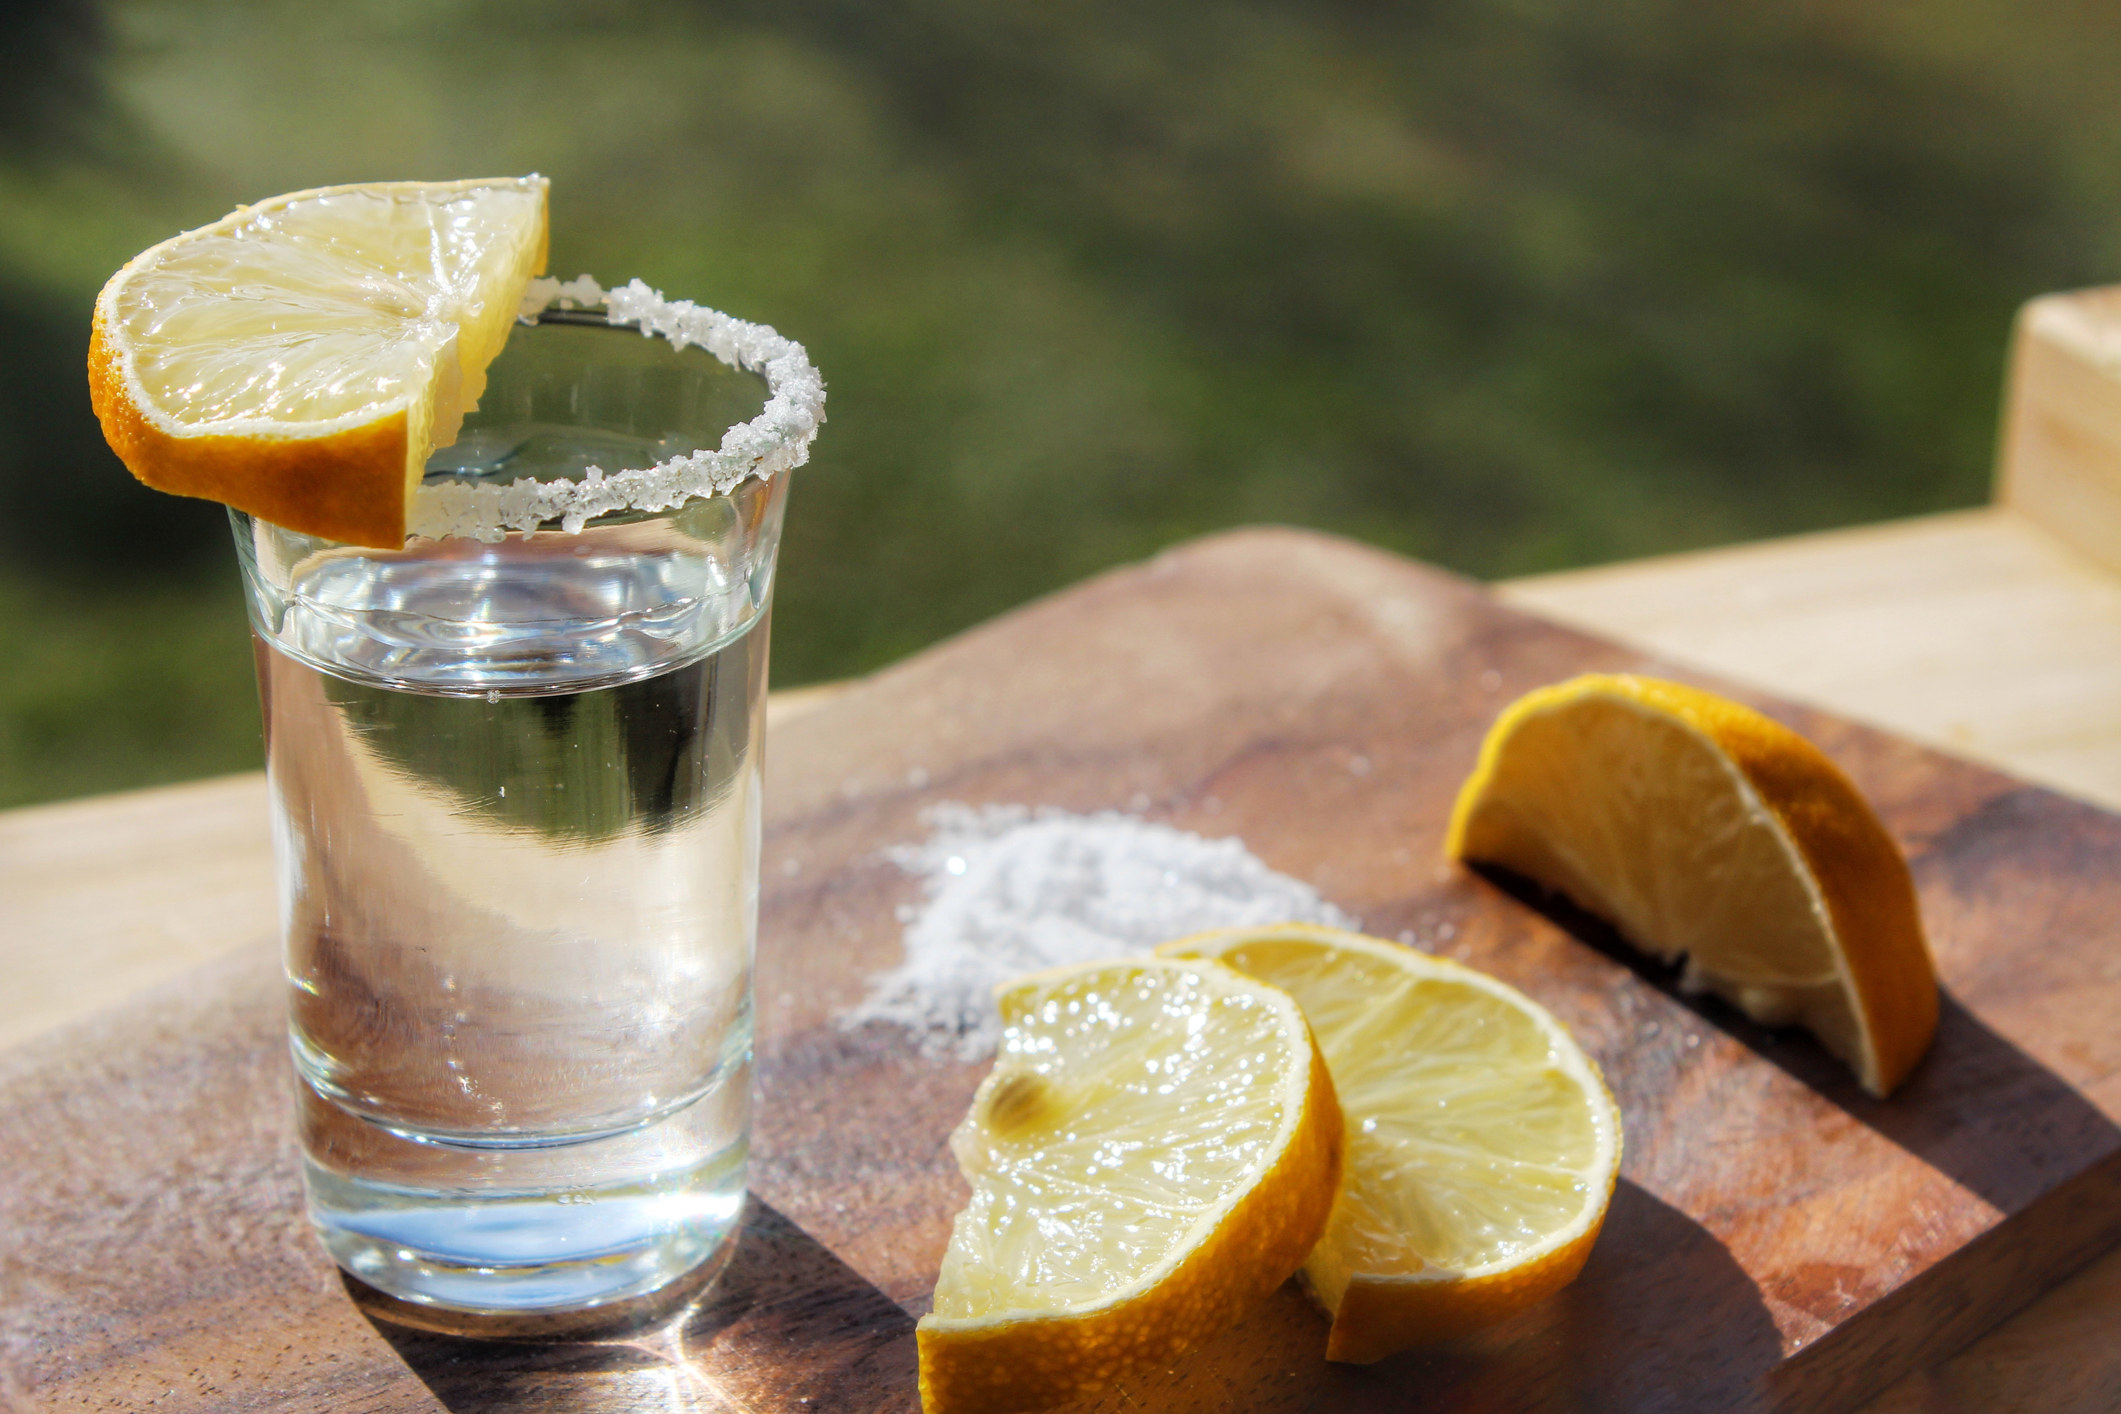 A tequila shot with sliced lemons